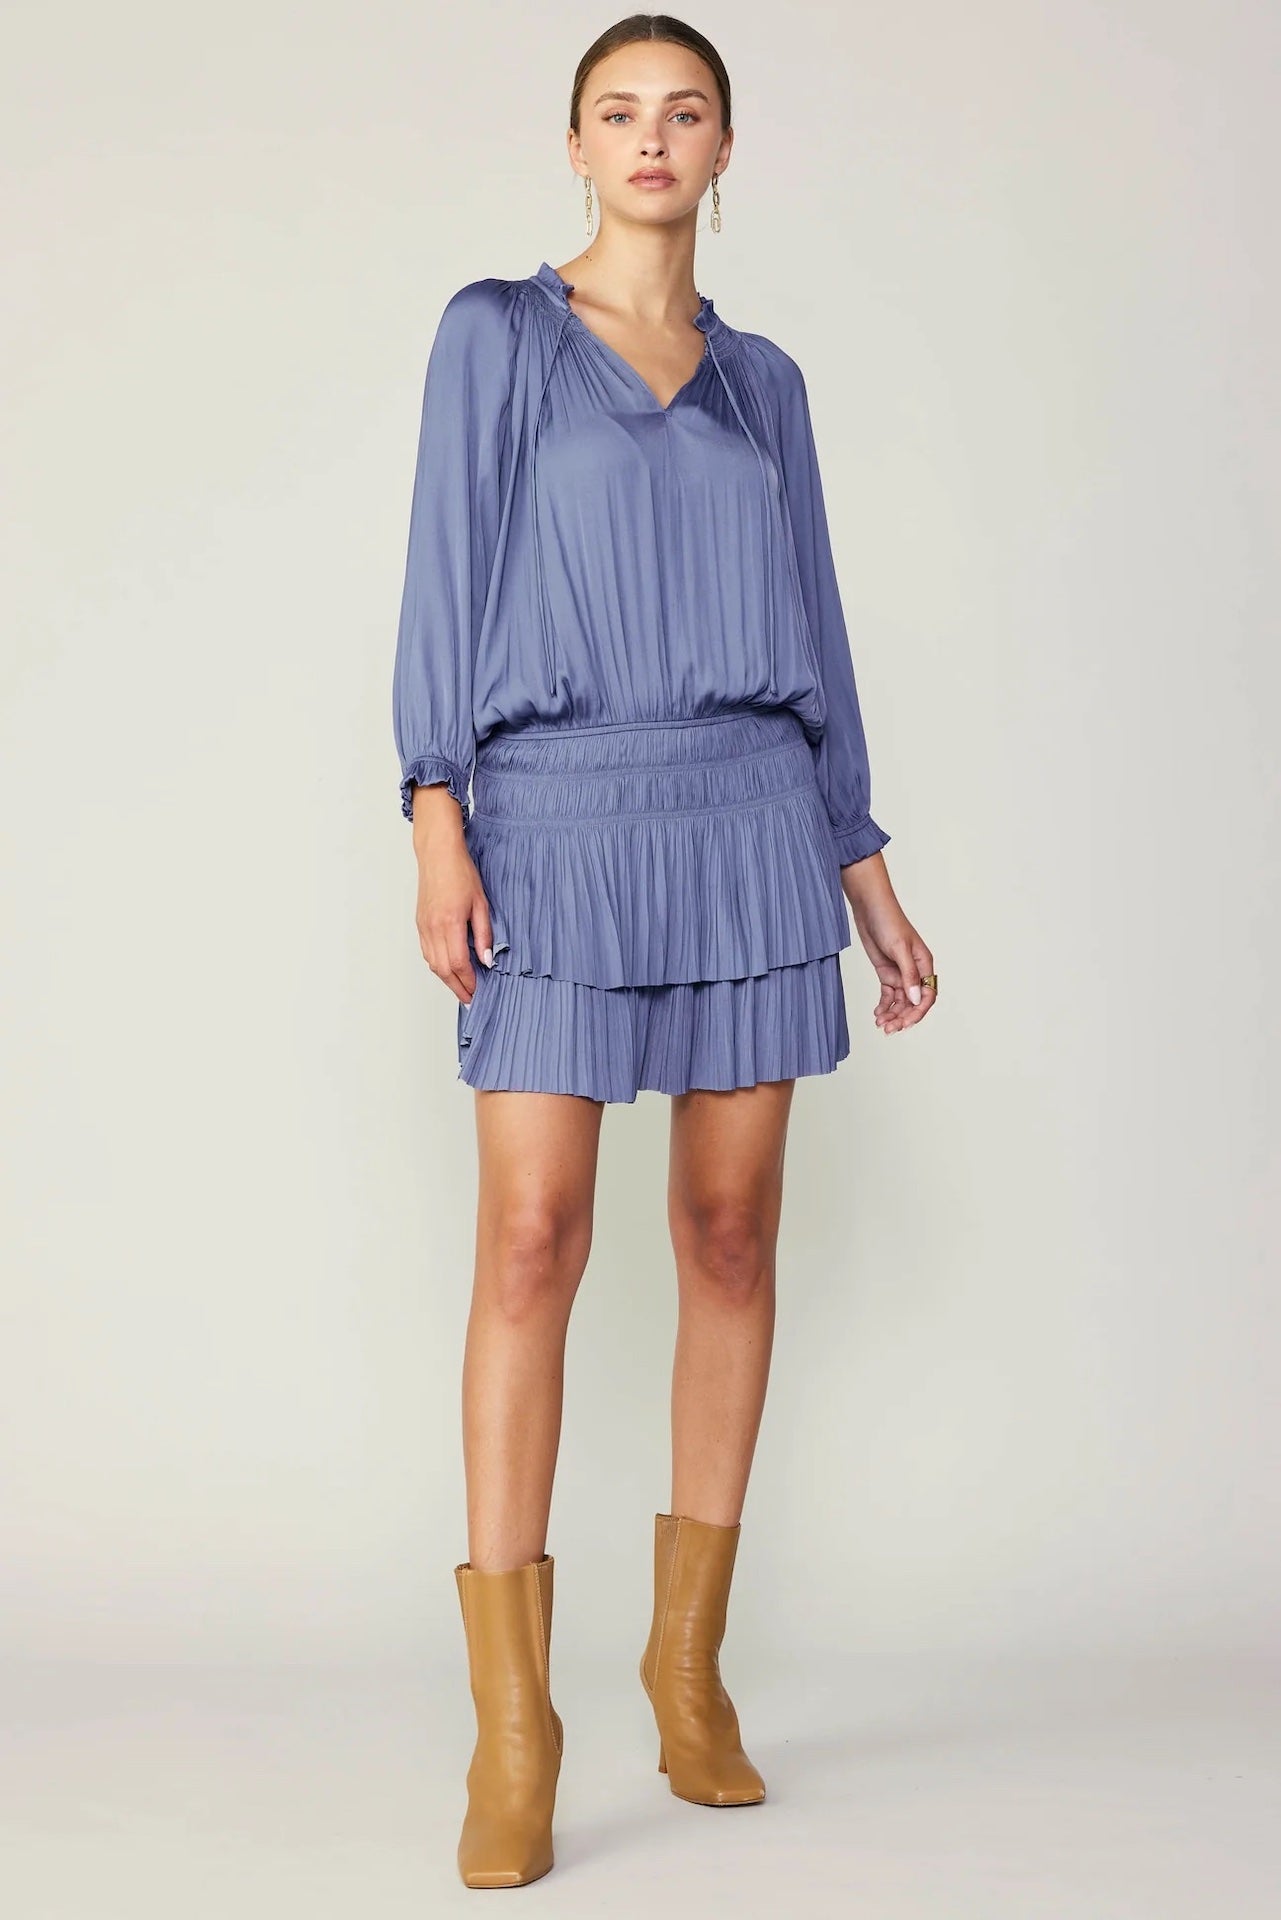 current air dress pleated mini dress with long sleeves